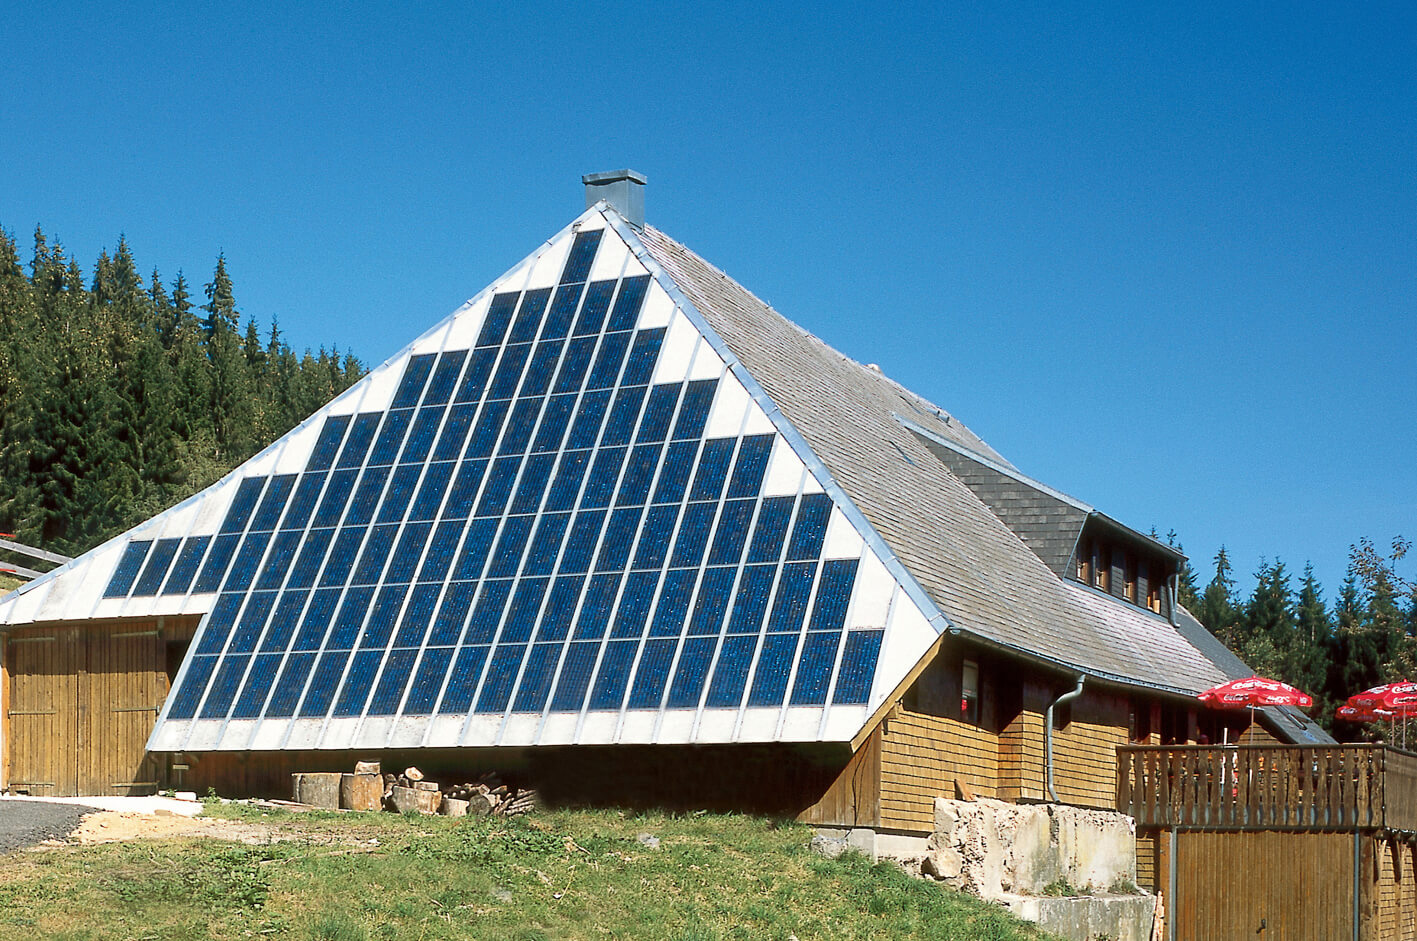 Since 1987 crystalline silicon photovoltaic modules provide electricity for Rappenecker Hof, a hiker&#39;s inn in the Black Forest. The photovoltaic system was produced back then by AEG, which later become SCHOTT Solar. 